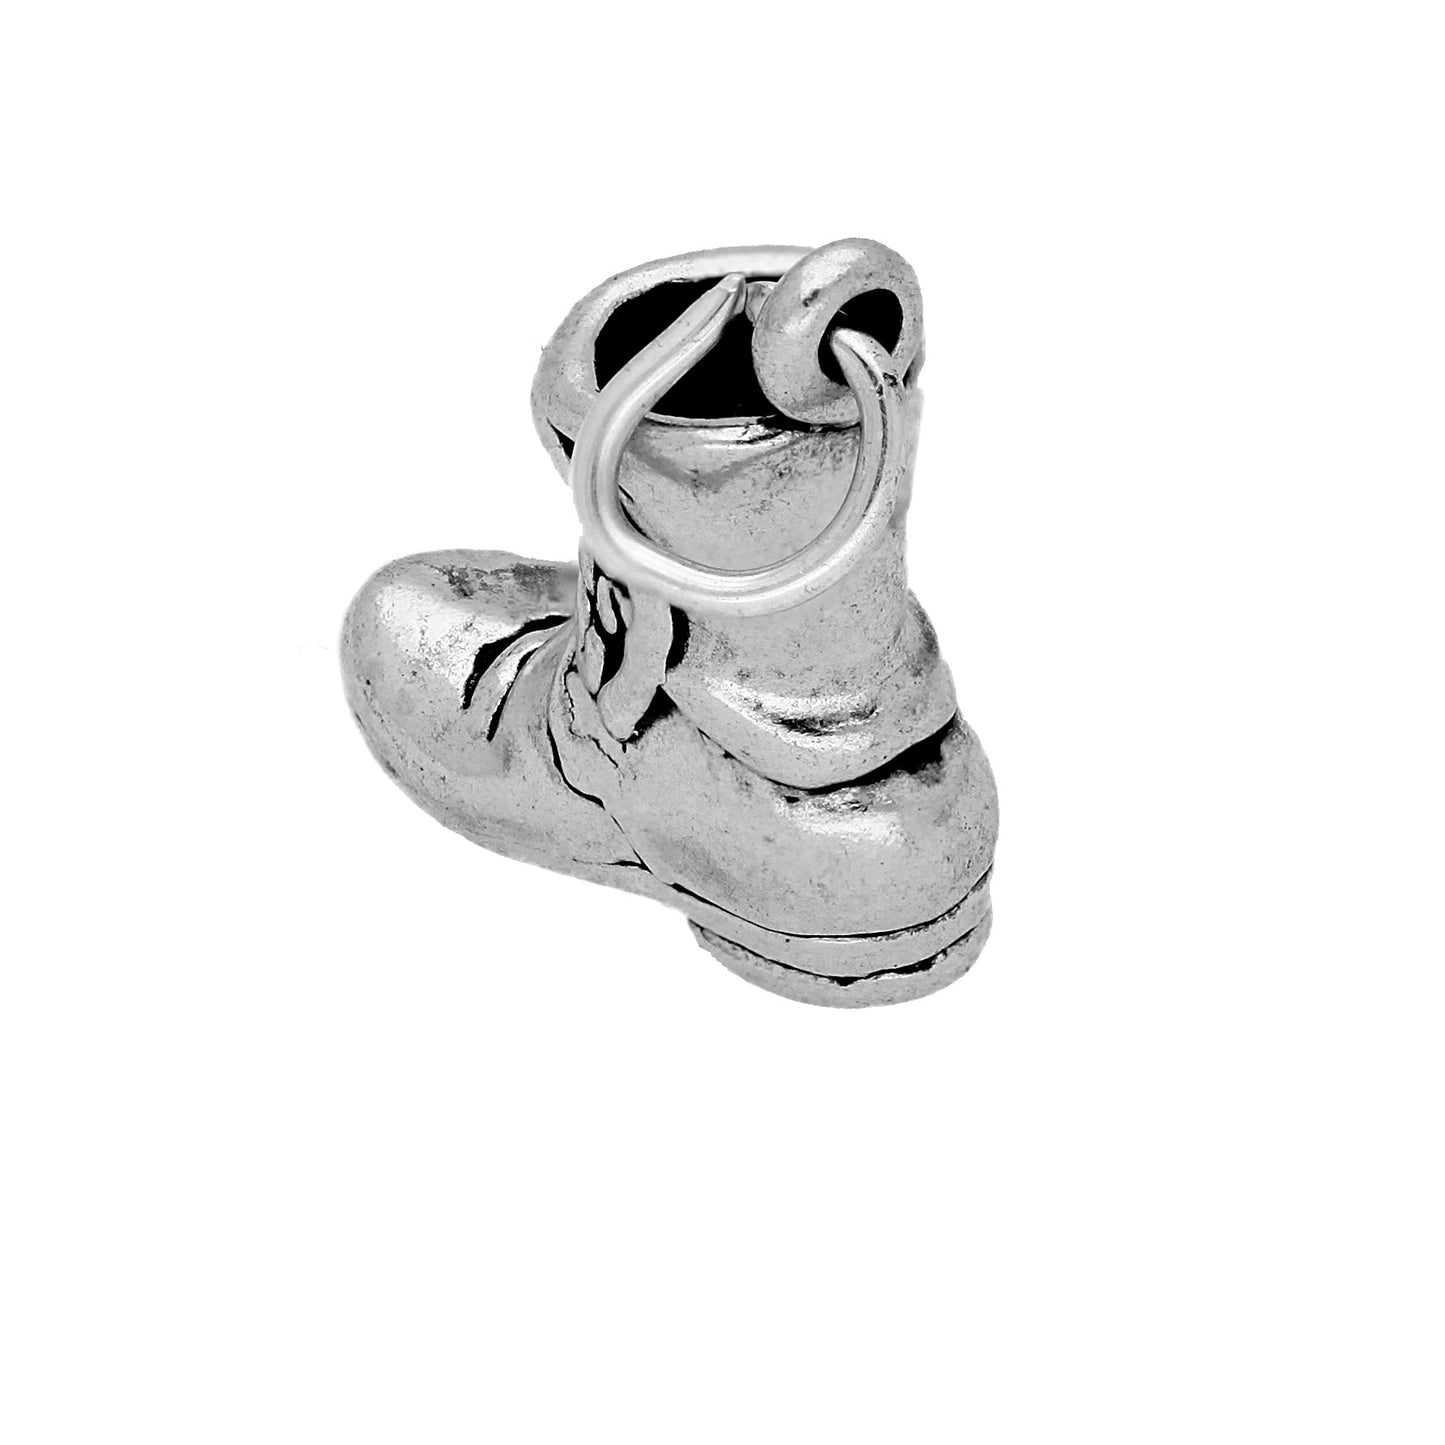 Sterling Silver Boot Charm